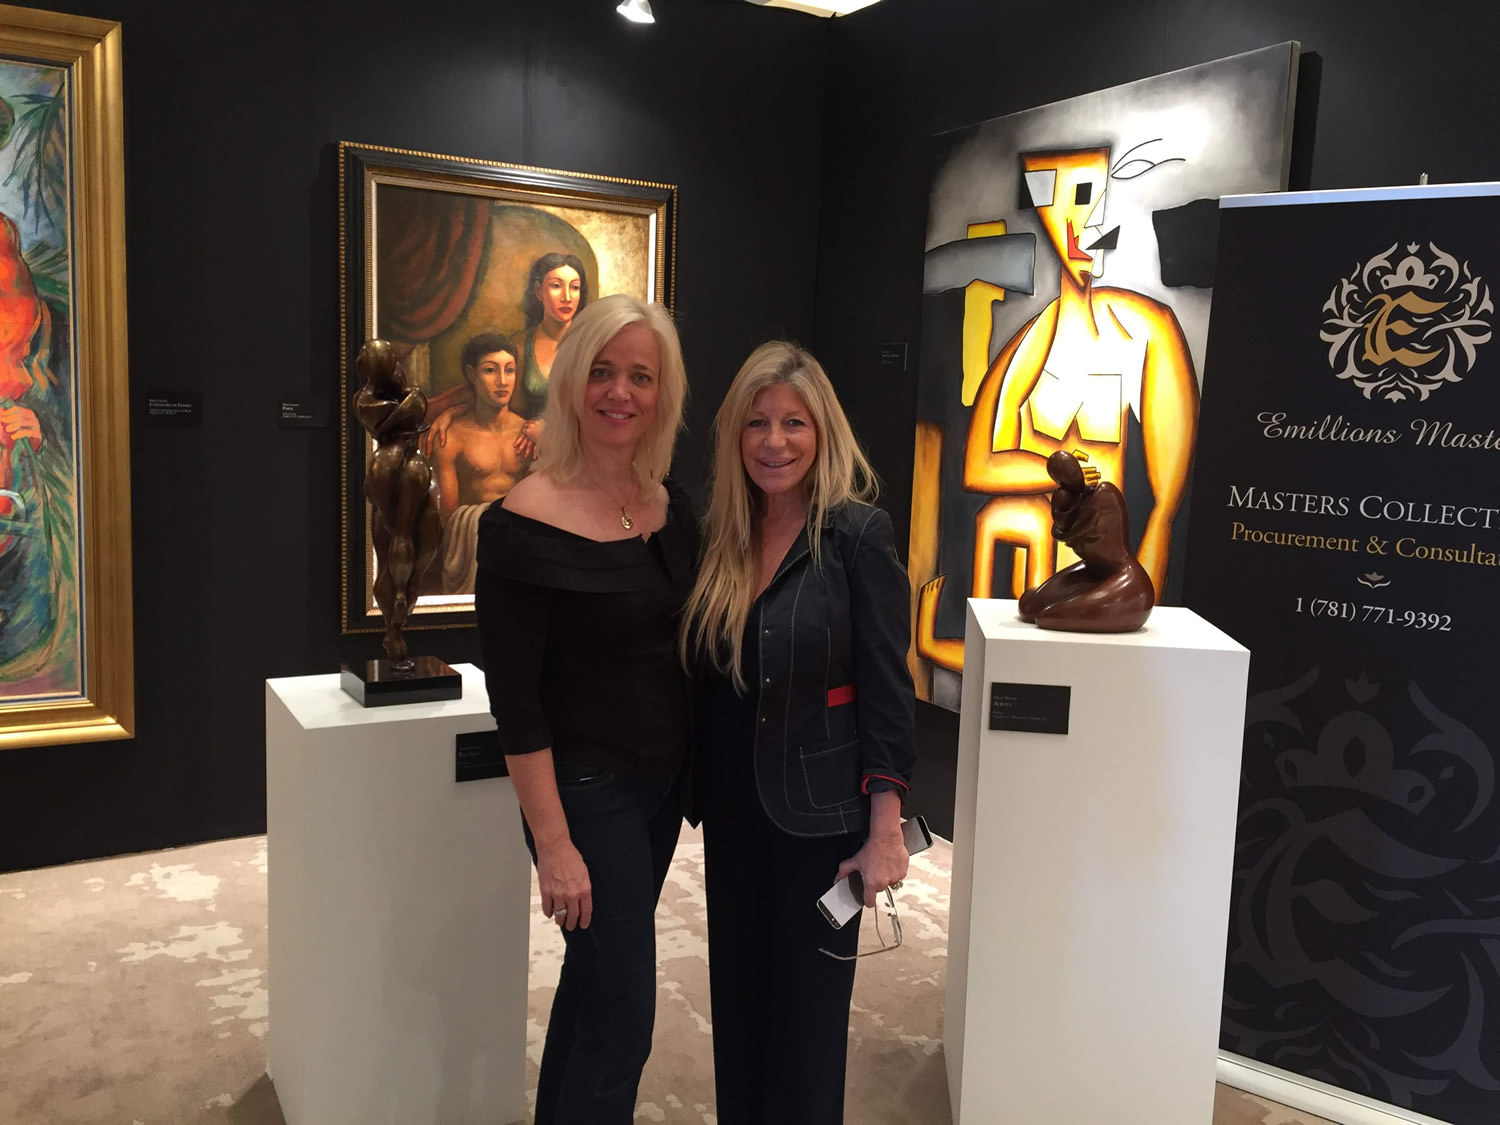 Marlissa and guest at a Masters Collection Gallery event